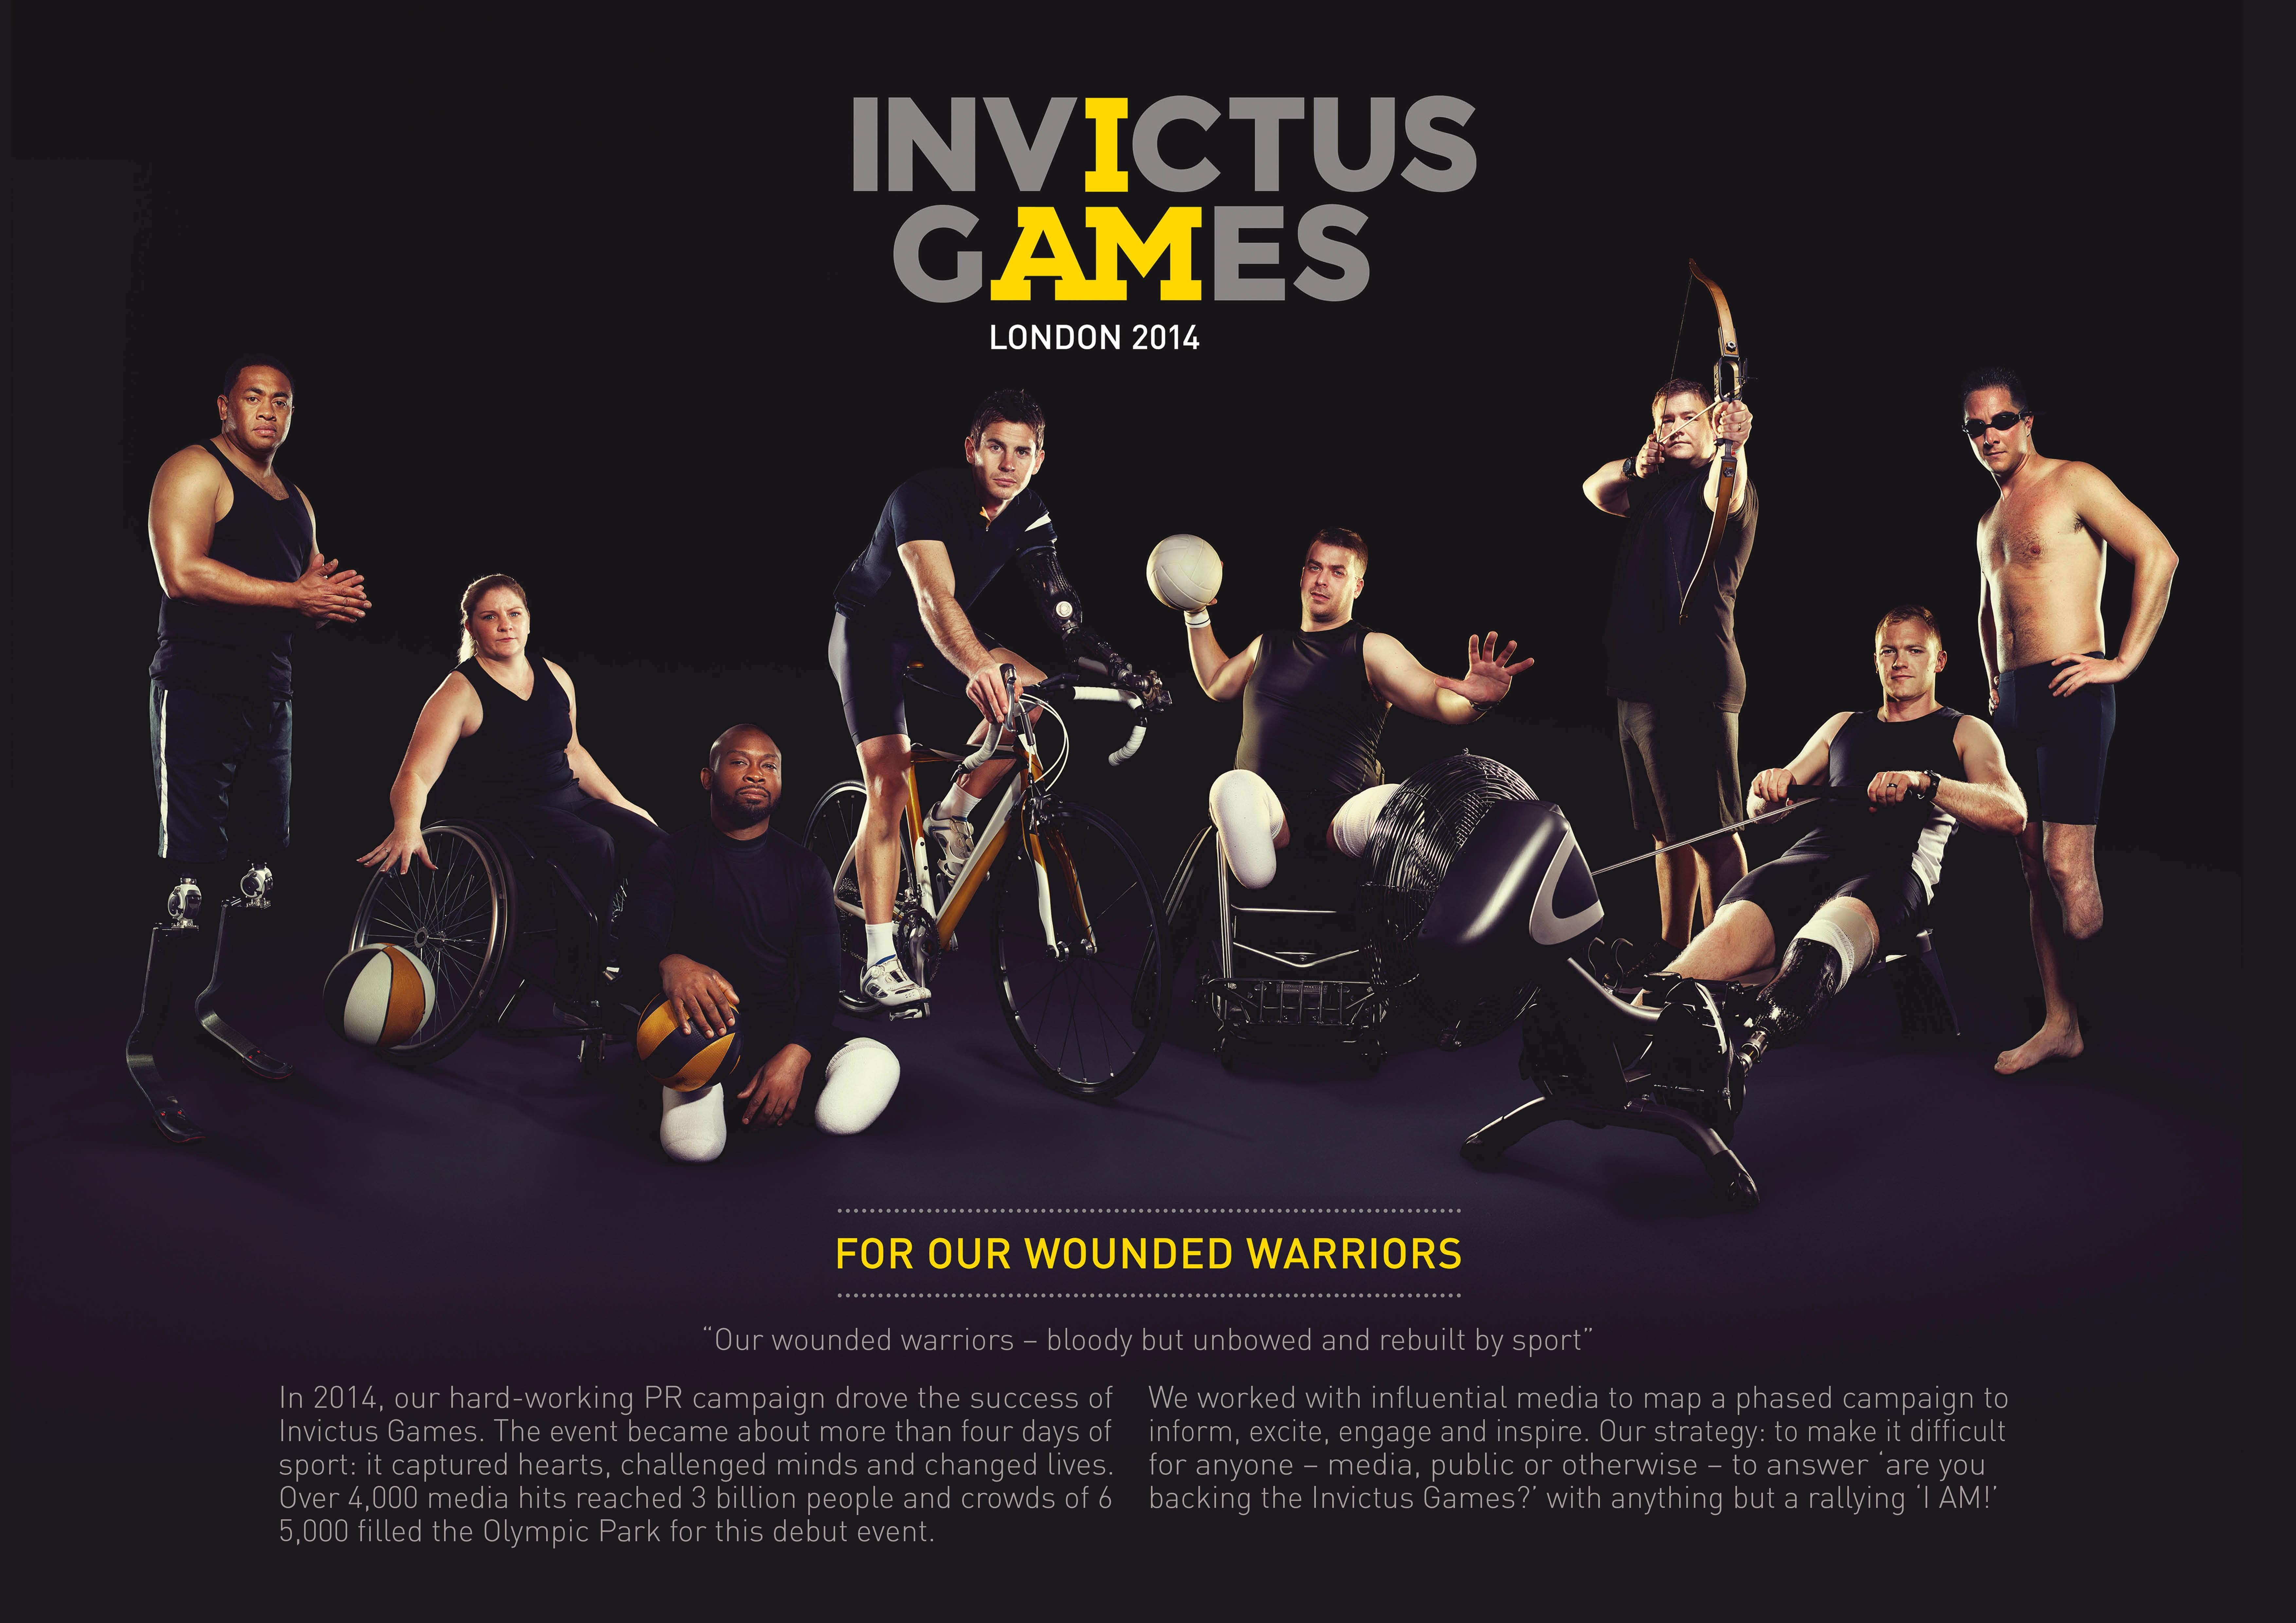 INVICTUS GAMES - FOR OUR 'WOUNDED WARRIORS'